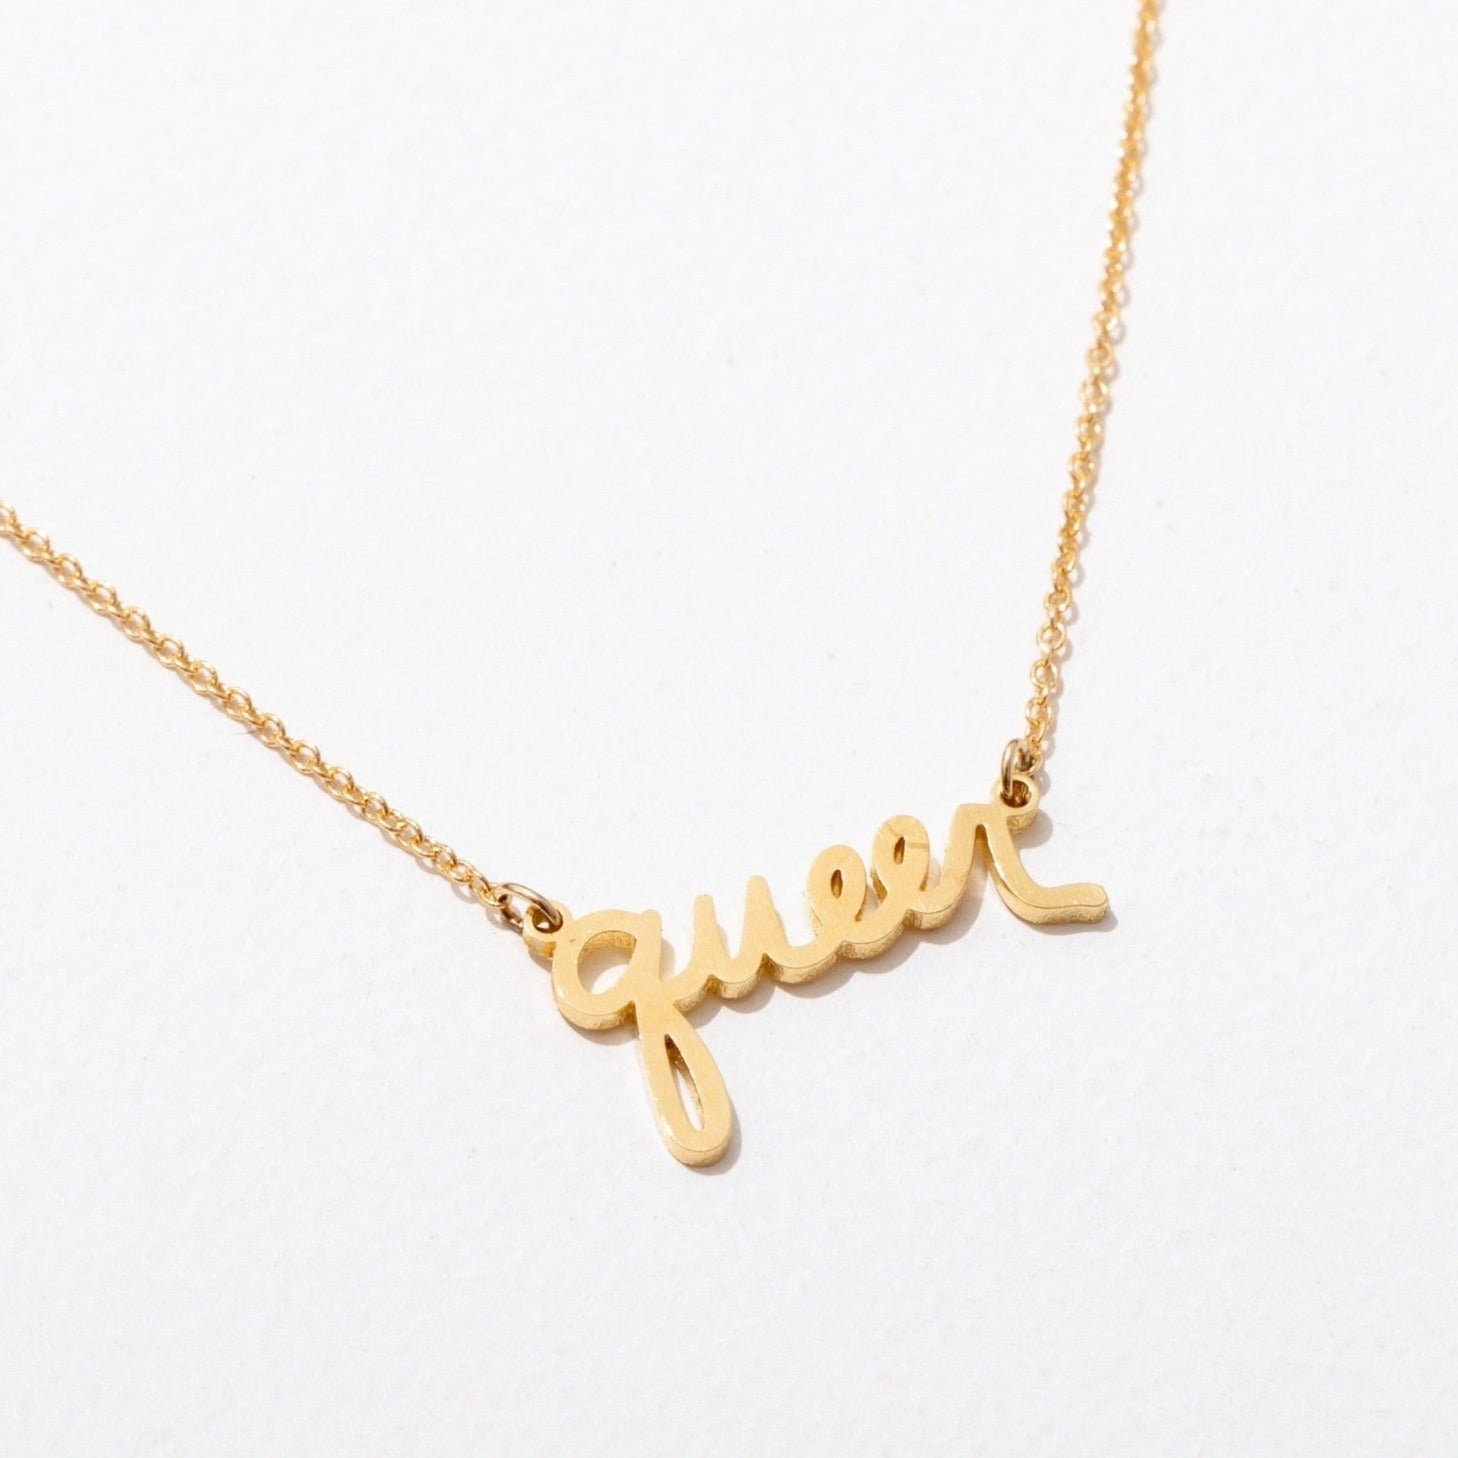 Queer Script Necklace | 14K Gold Plated Script Name Chain Necklace |  Larissa Loden